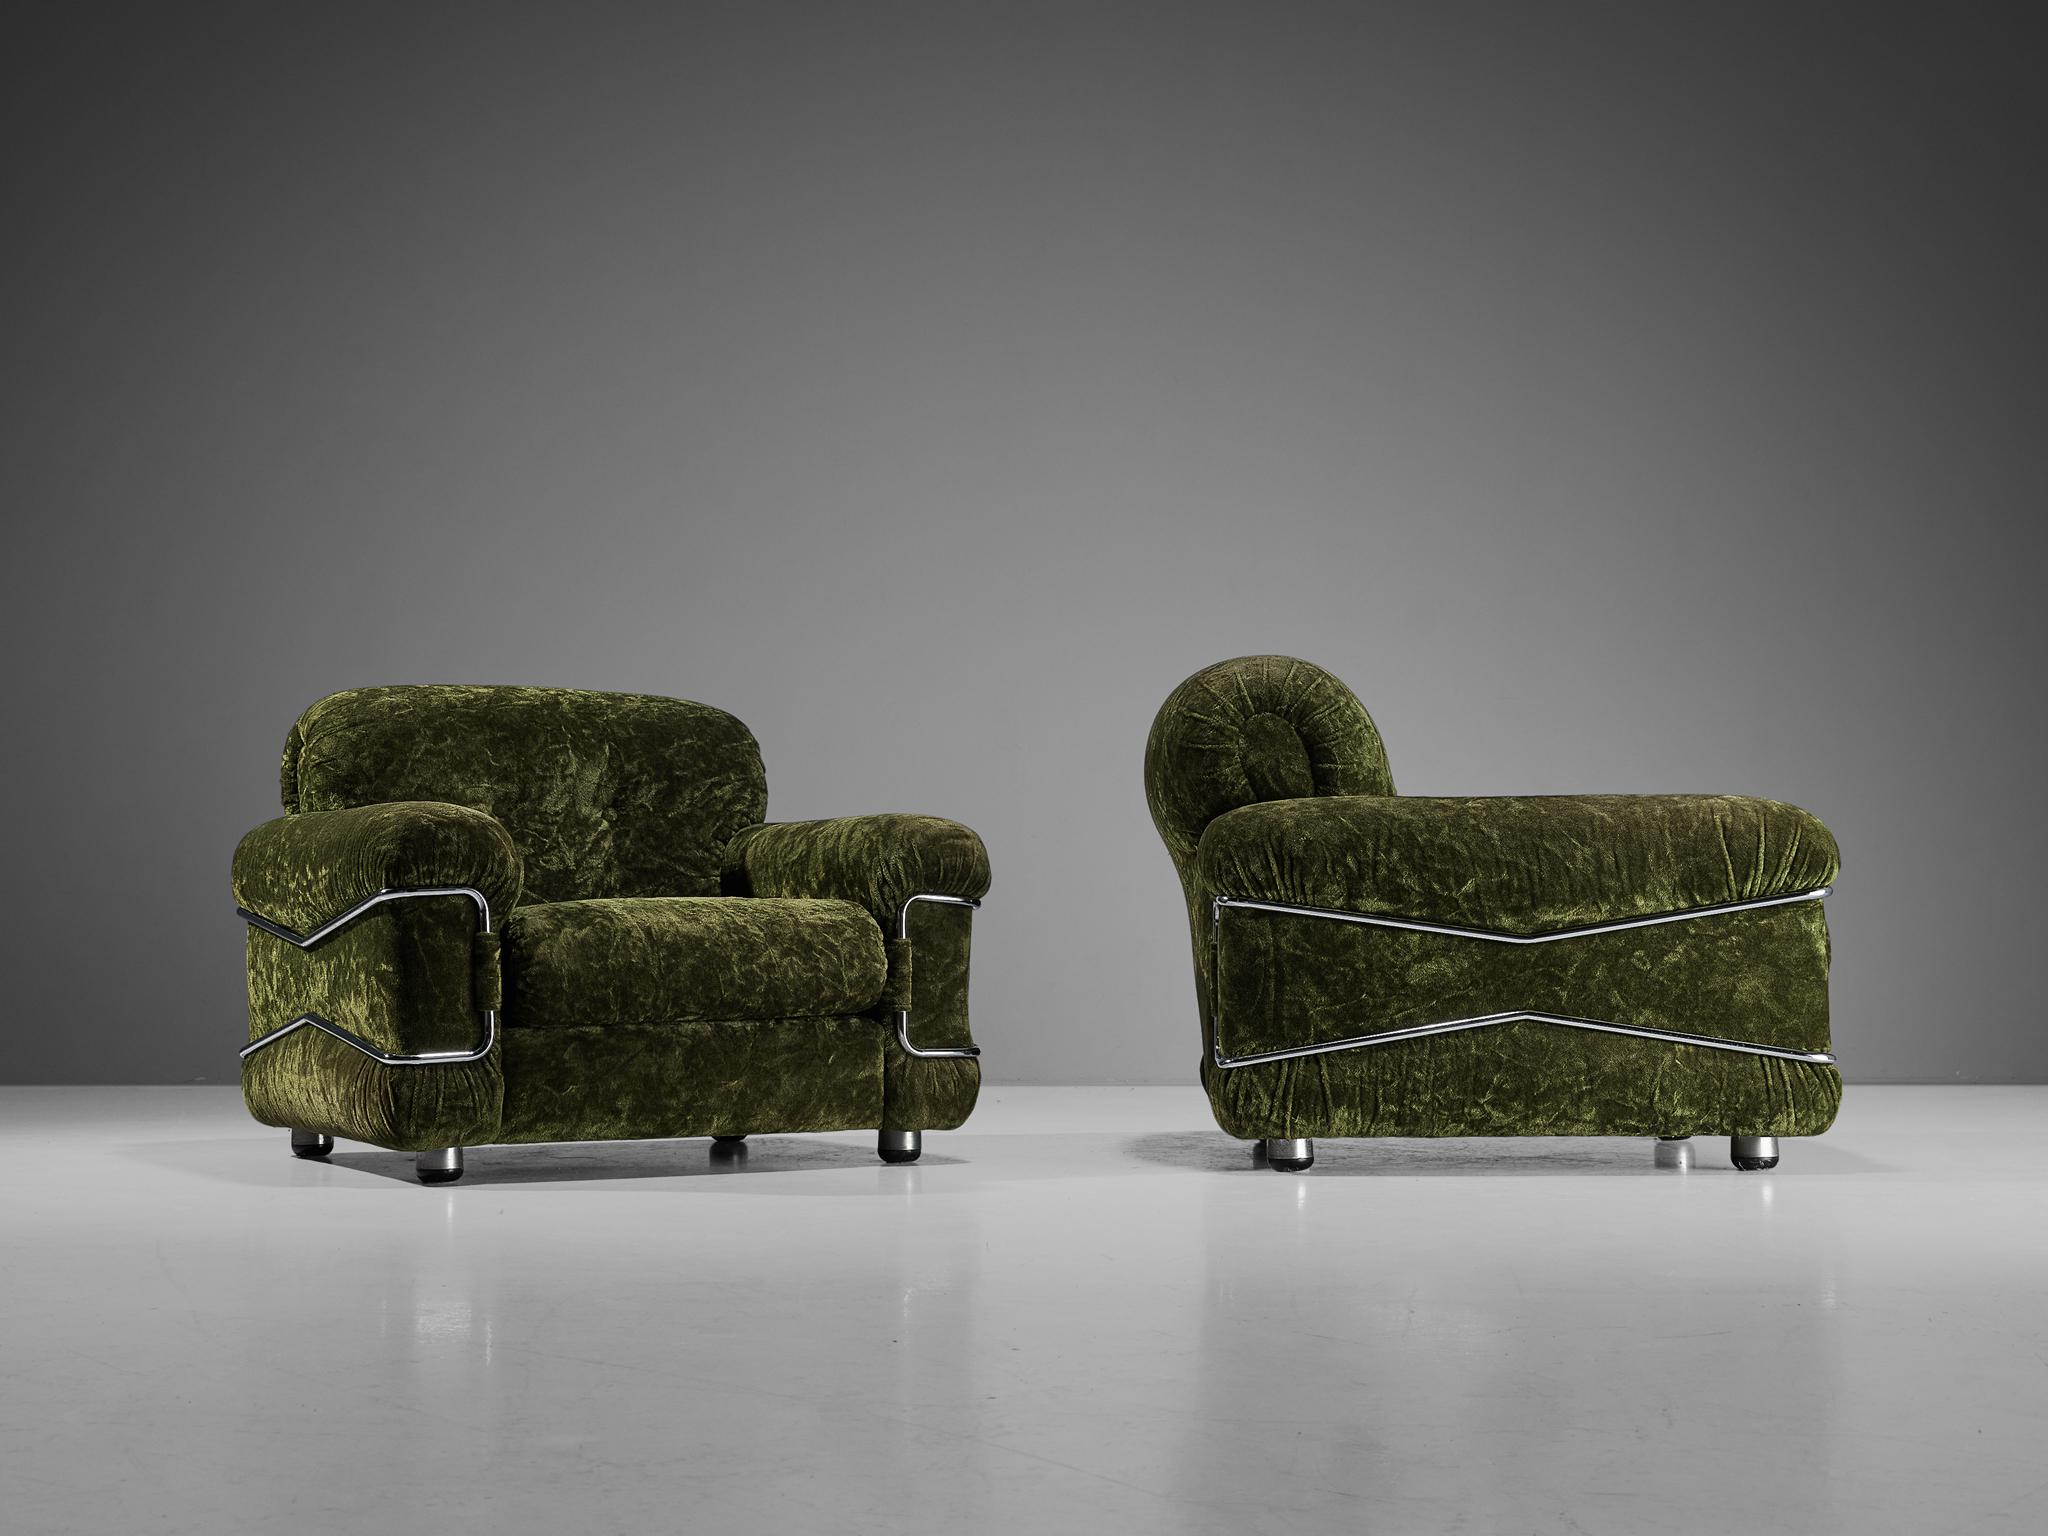 Ceriotti Italia, pair of 'Pompon' lounge chairs, velvet, chrome, plastic, Italy, 1970s

Wonderfully soft and bulky lounge chairs made by the manufacturer Cetiotti Italia in the 1970s. The partially tufted dark green velvet upholstery stands out very